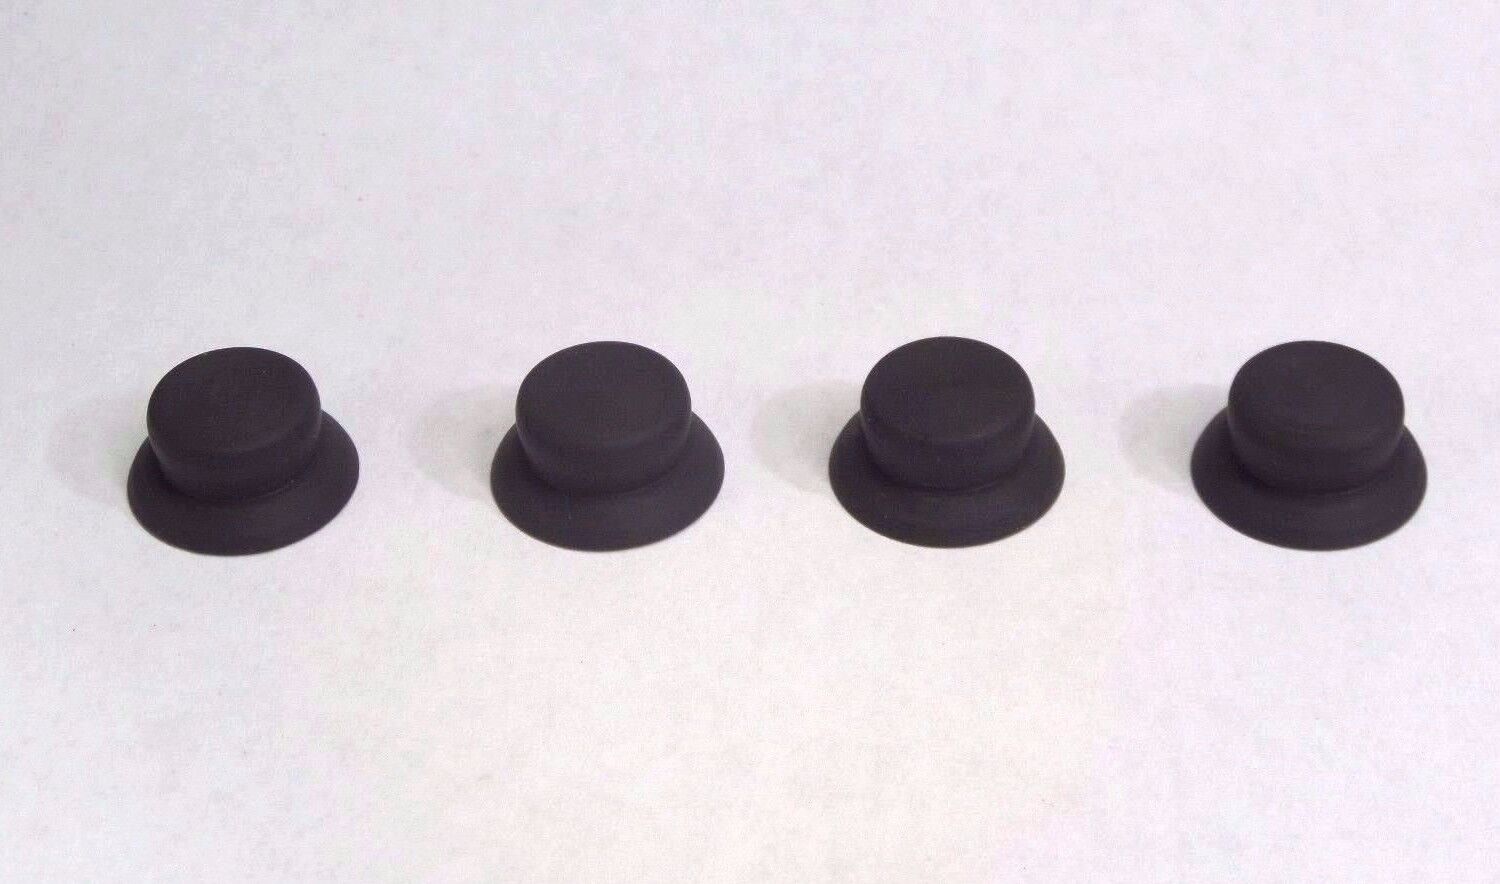 Typewriter Repair  New Replacement Rubber Feet for Folding Corona No.3 Portable